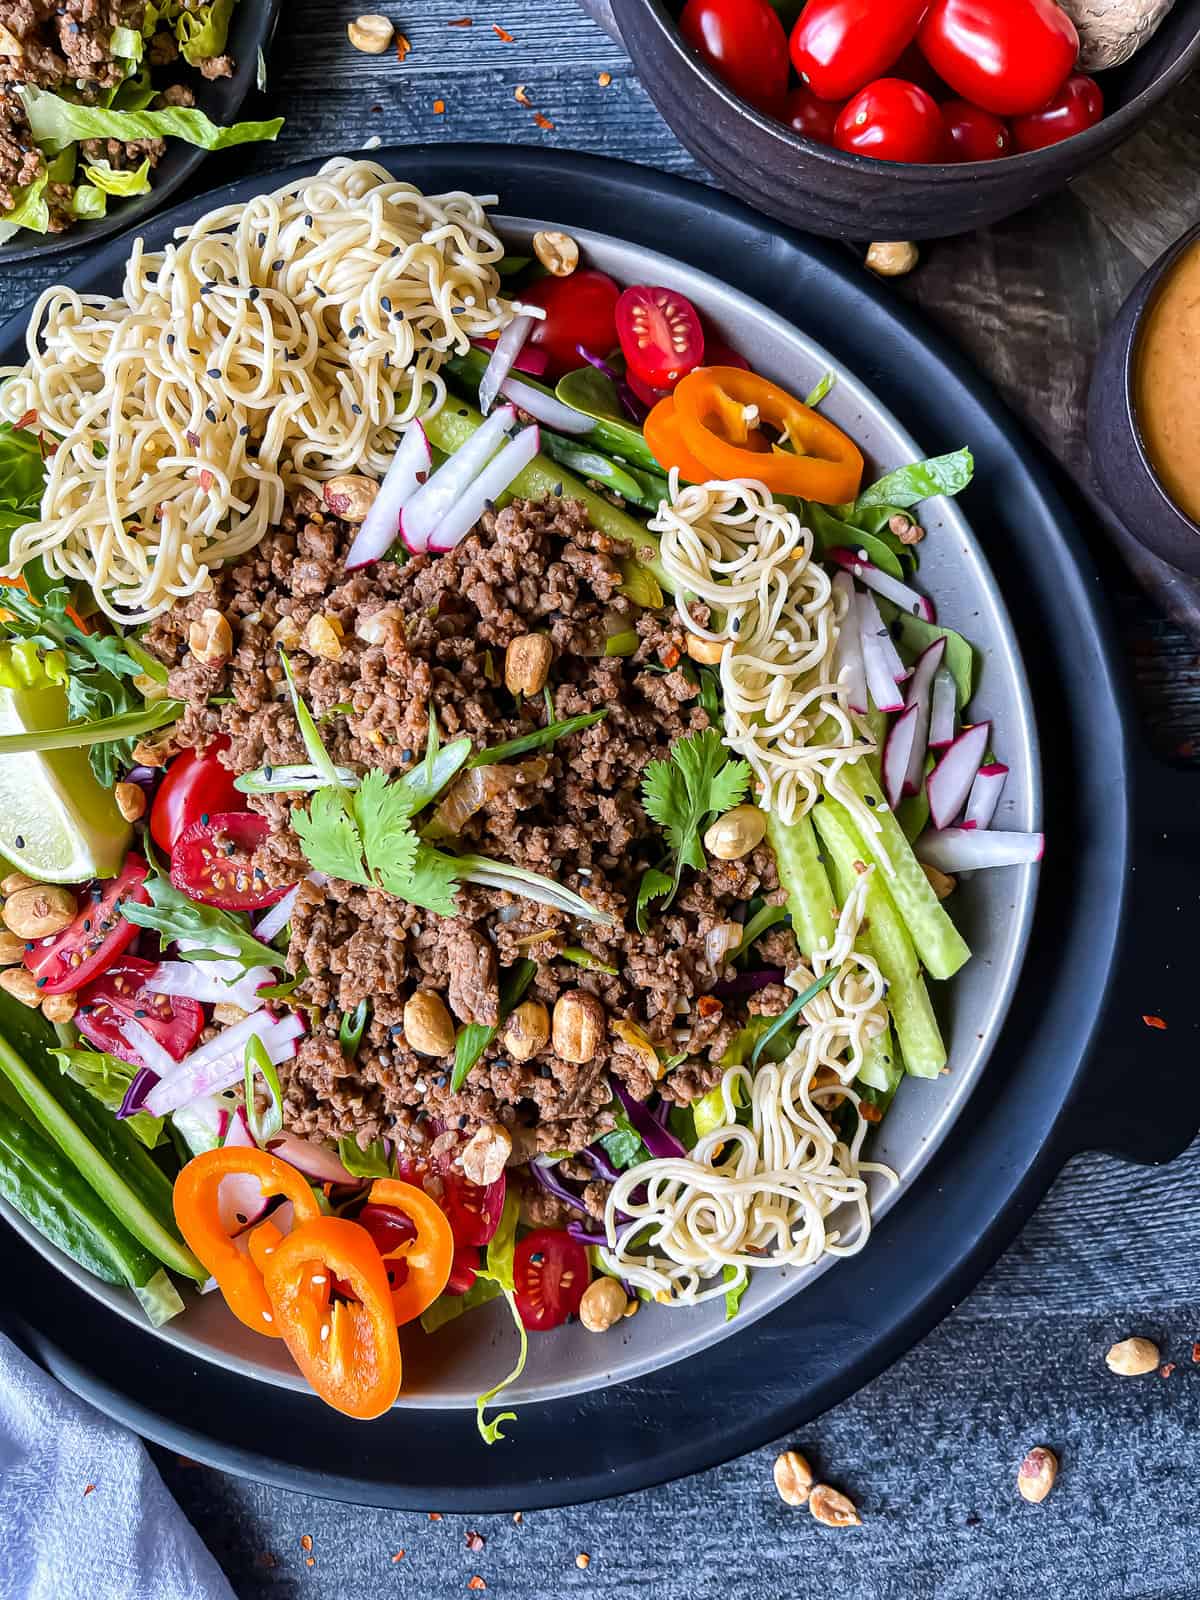 Thai beef salad with peanut dressing. Garnished with fresh veggies, rice noodles, sesame seeds, and extra peanuts